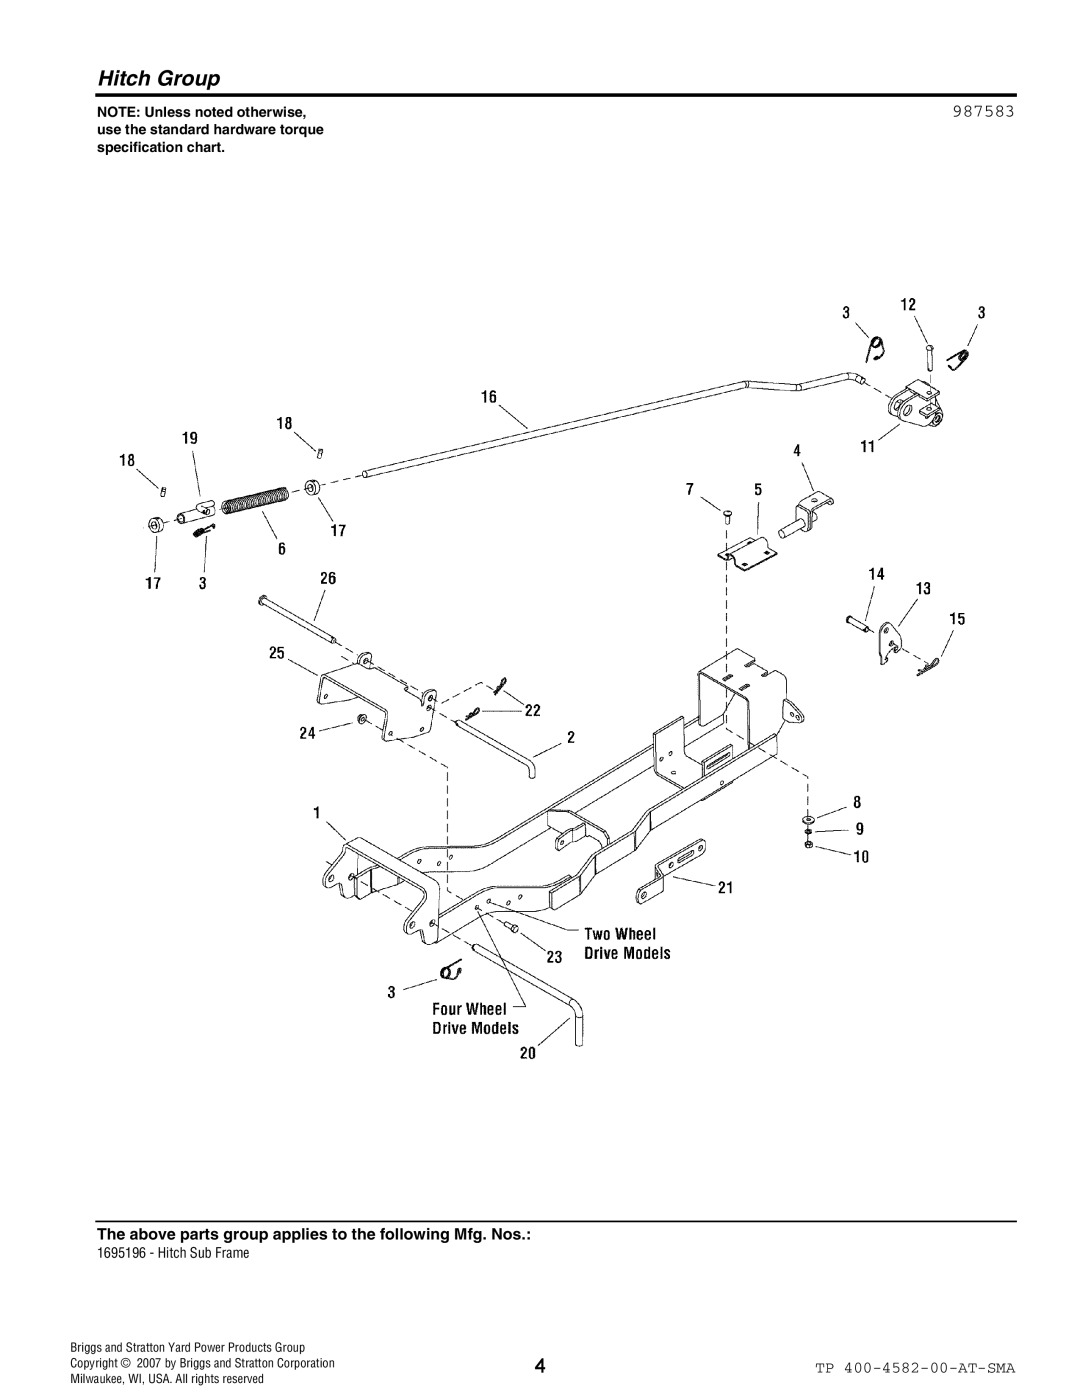 Snapper 4582 manual Hitch Group, 987583, NOTE Unless noted otherwise, Briggs and Stratton Yard Power Products Group 